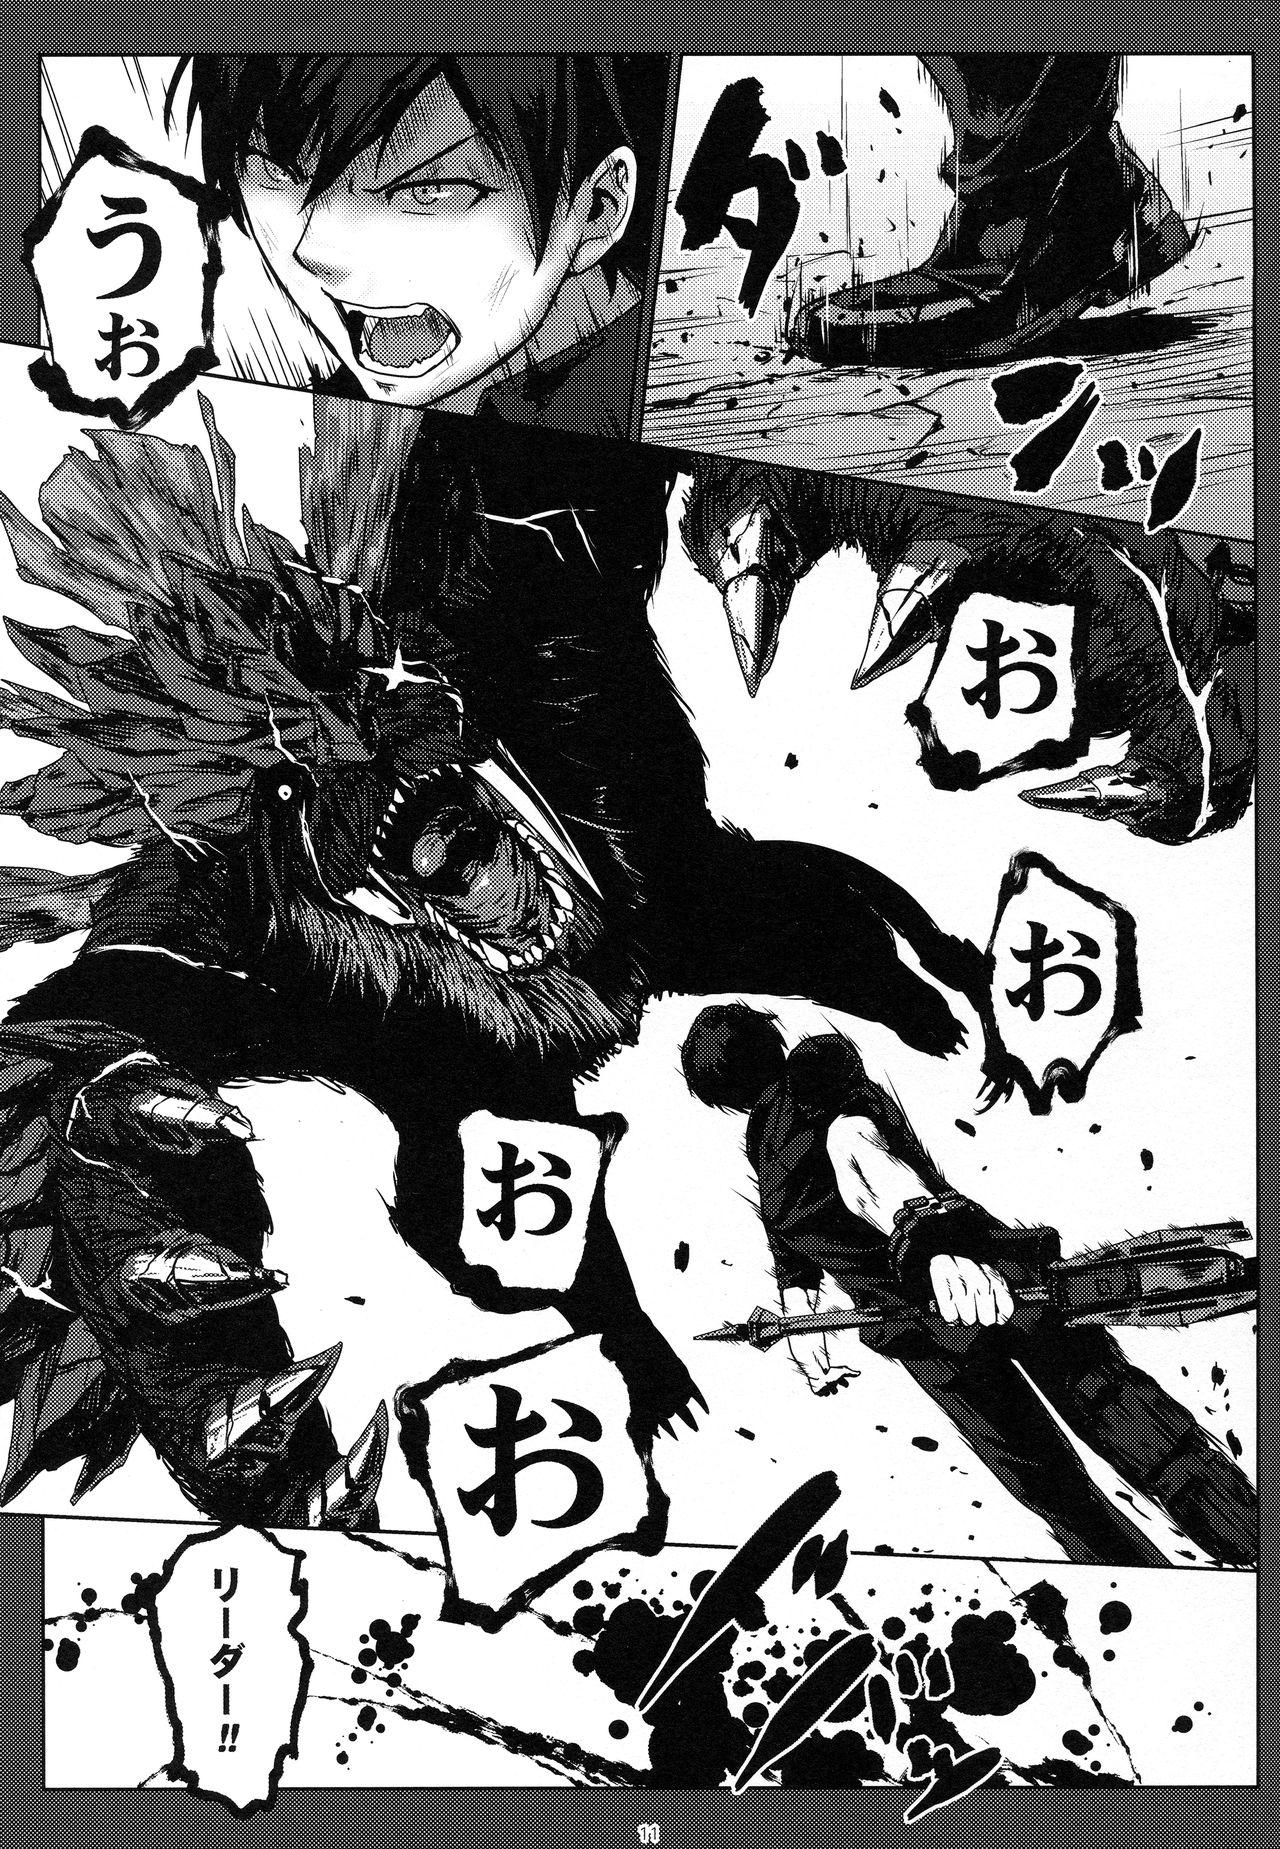 Chacal Again #3 All That Heaven Allows - God eater Caiu Na Net - Page 10